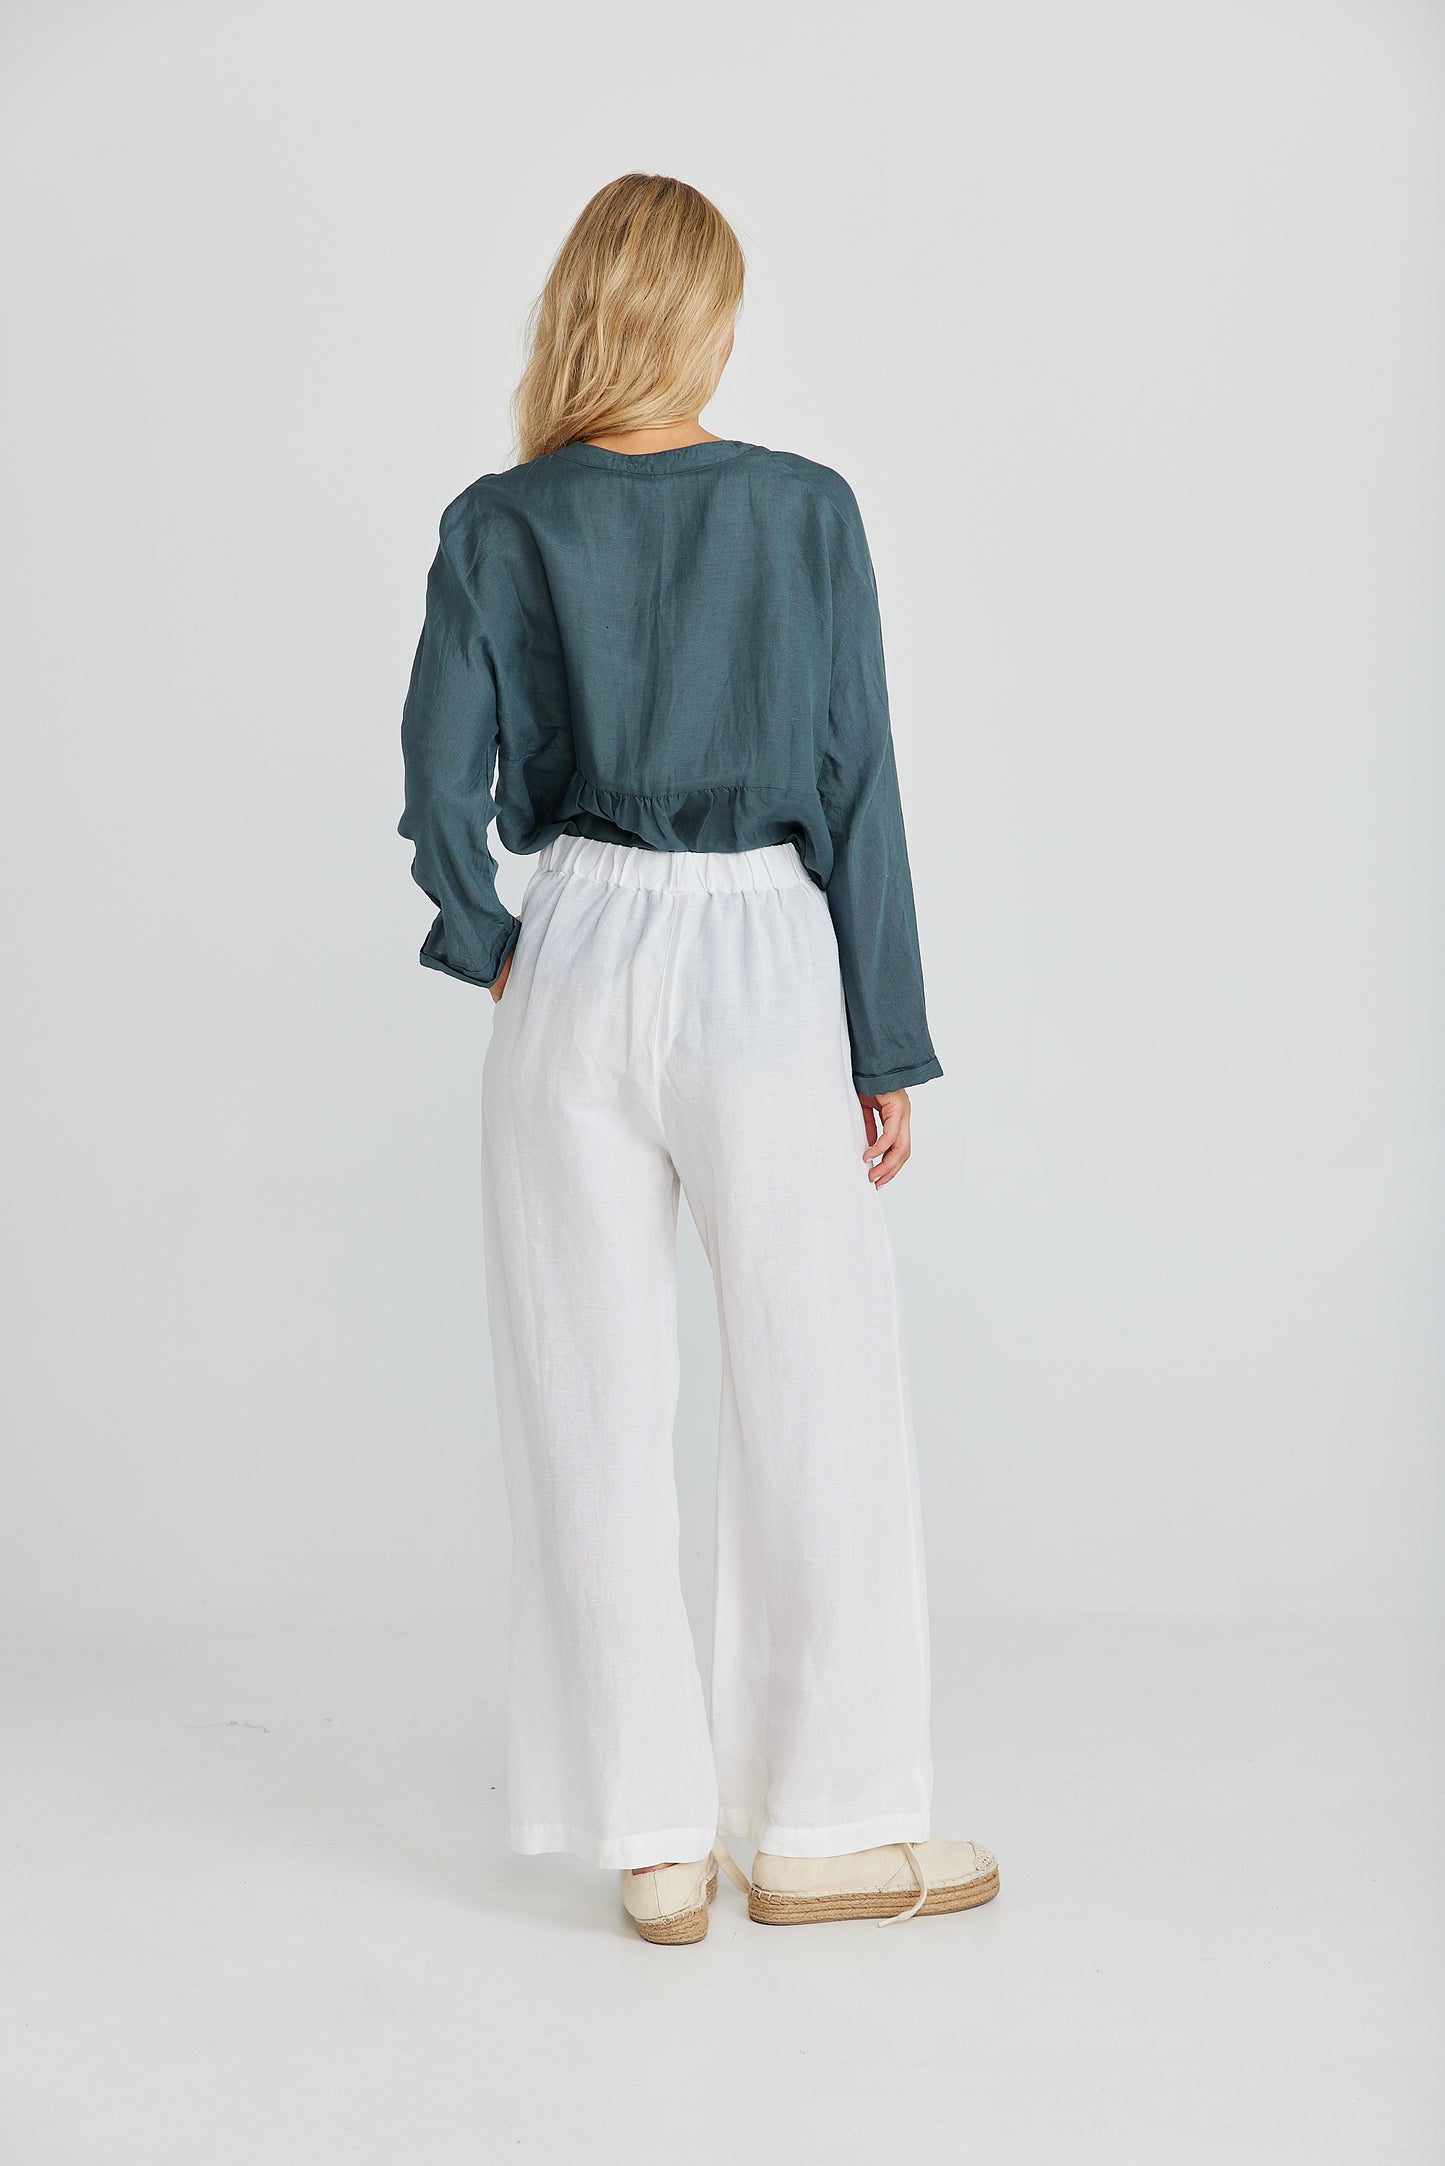 The Shanty Dickens Pants - White Linen